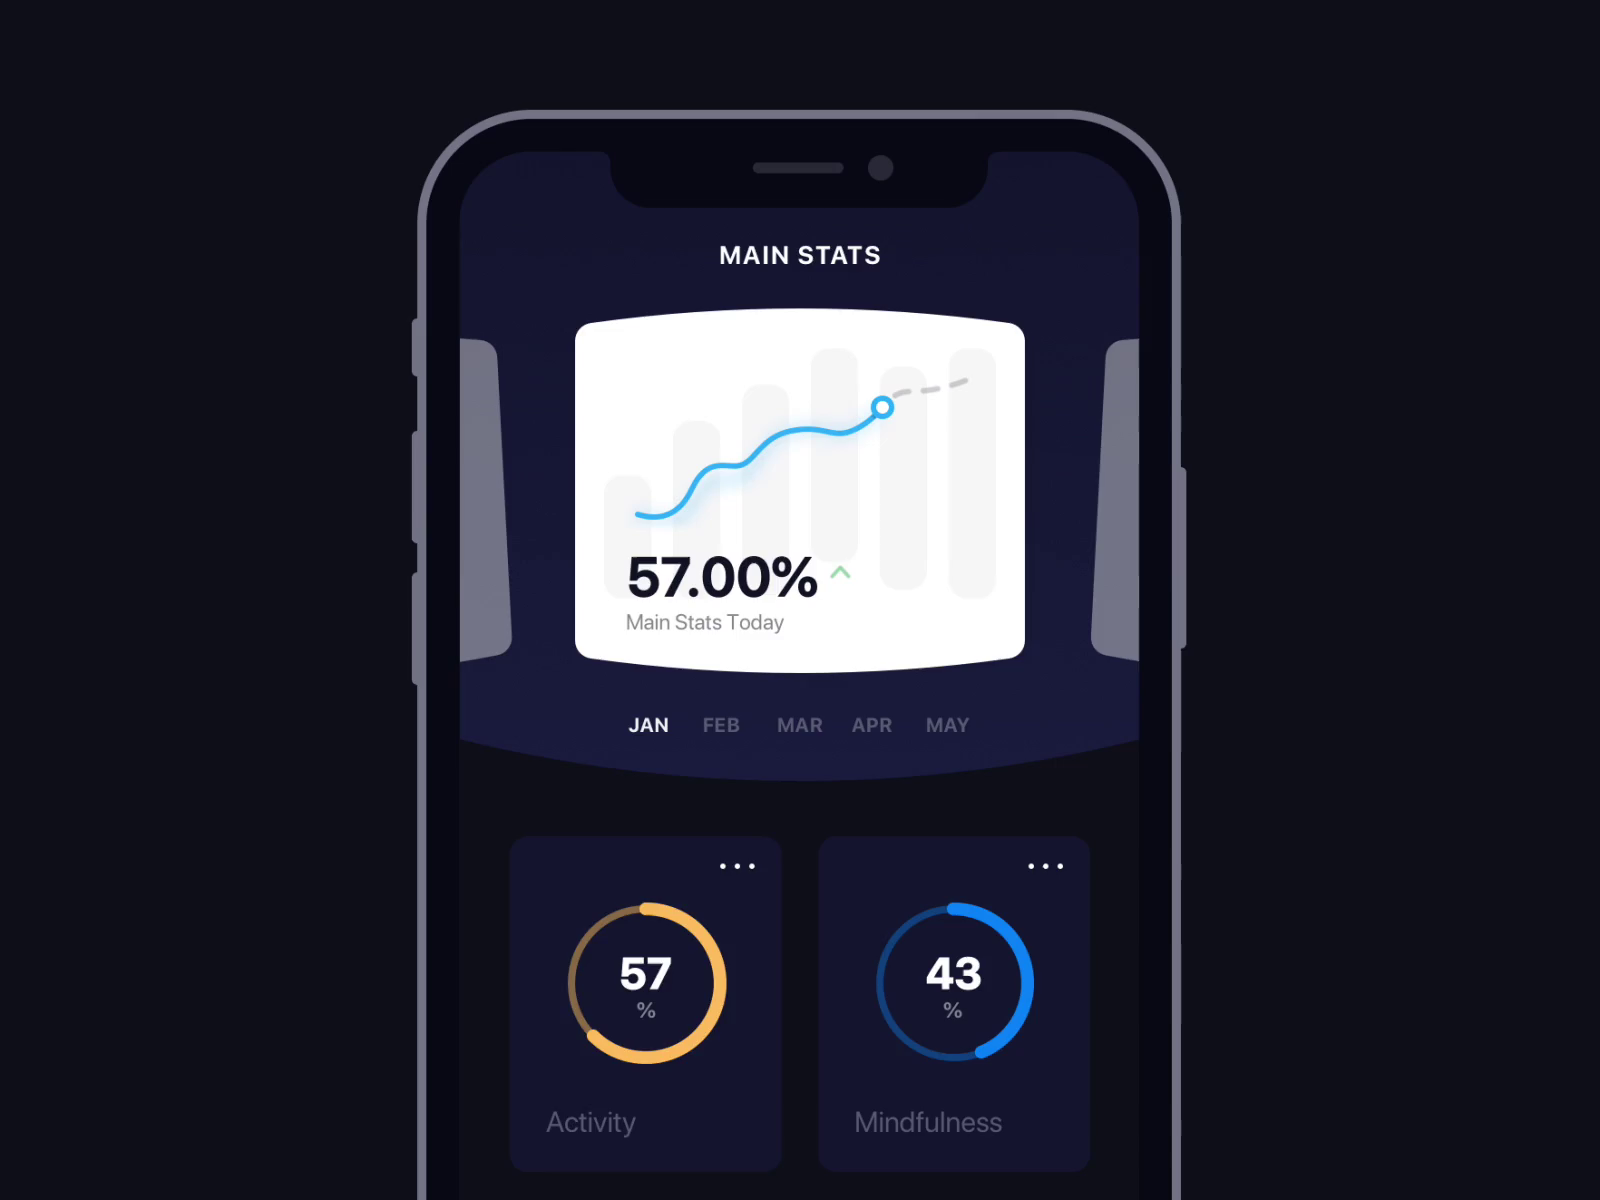 android life tracker